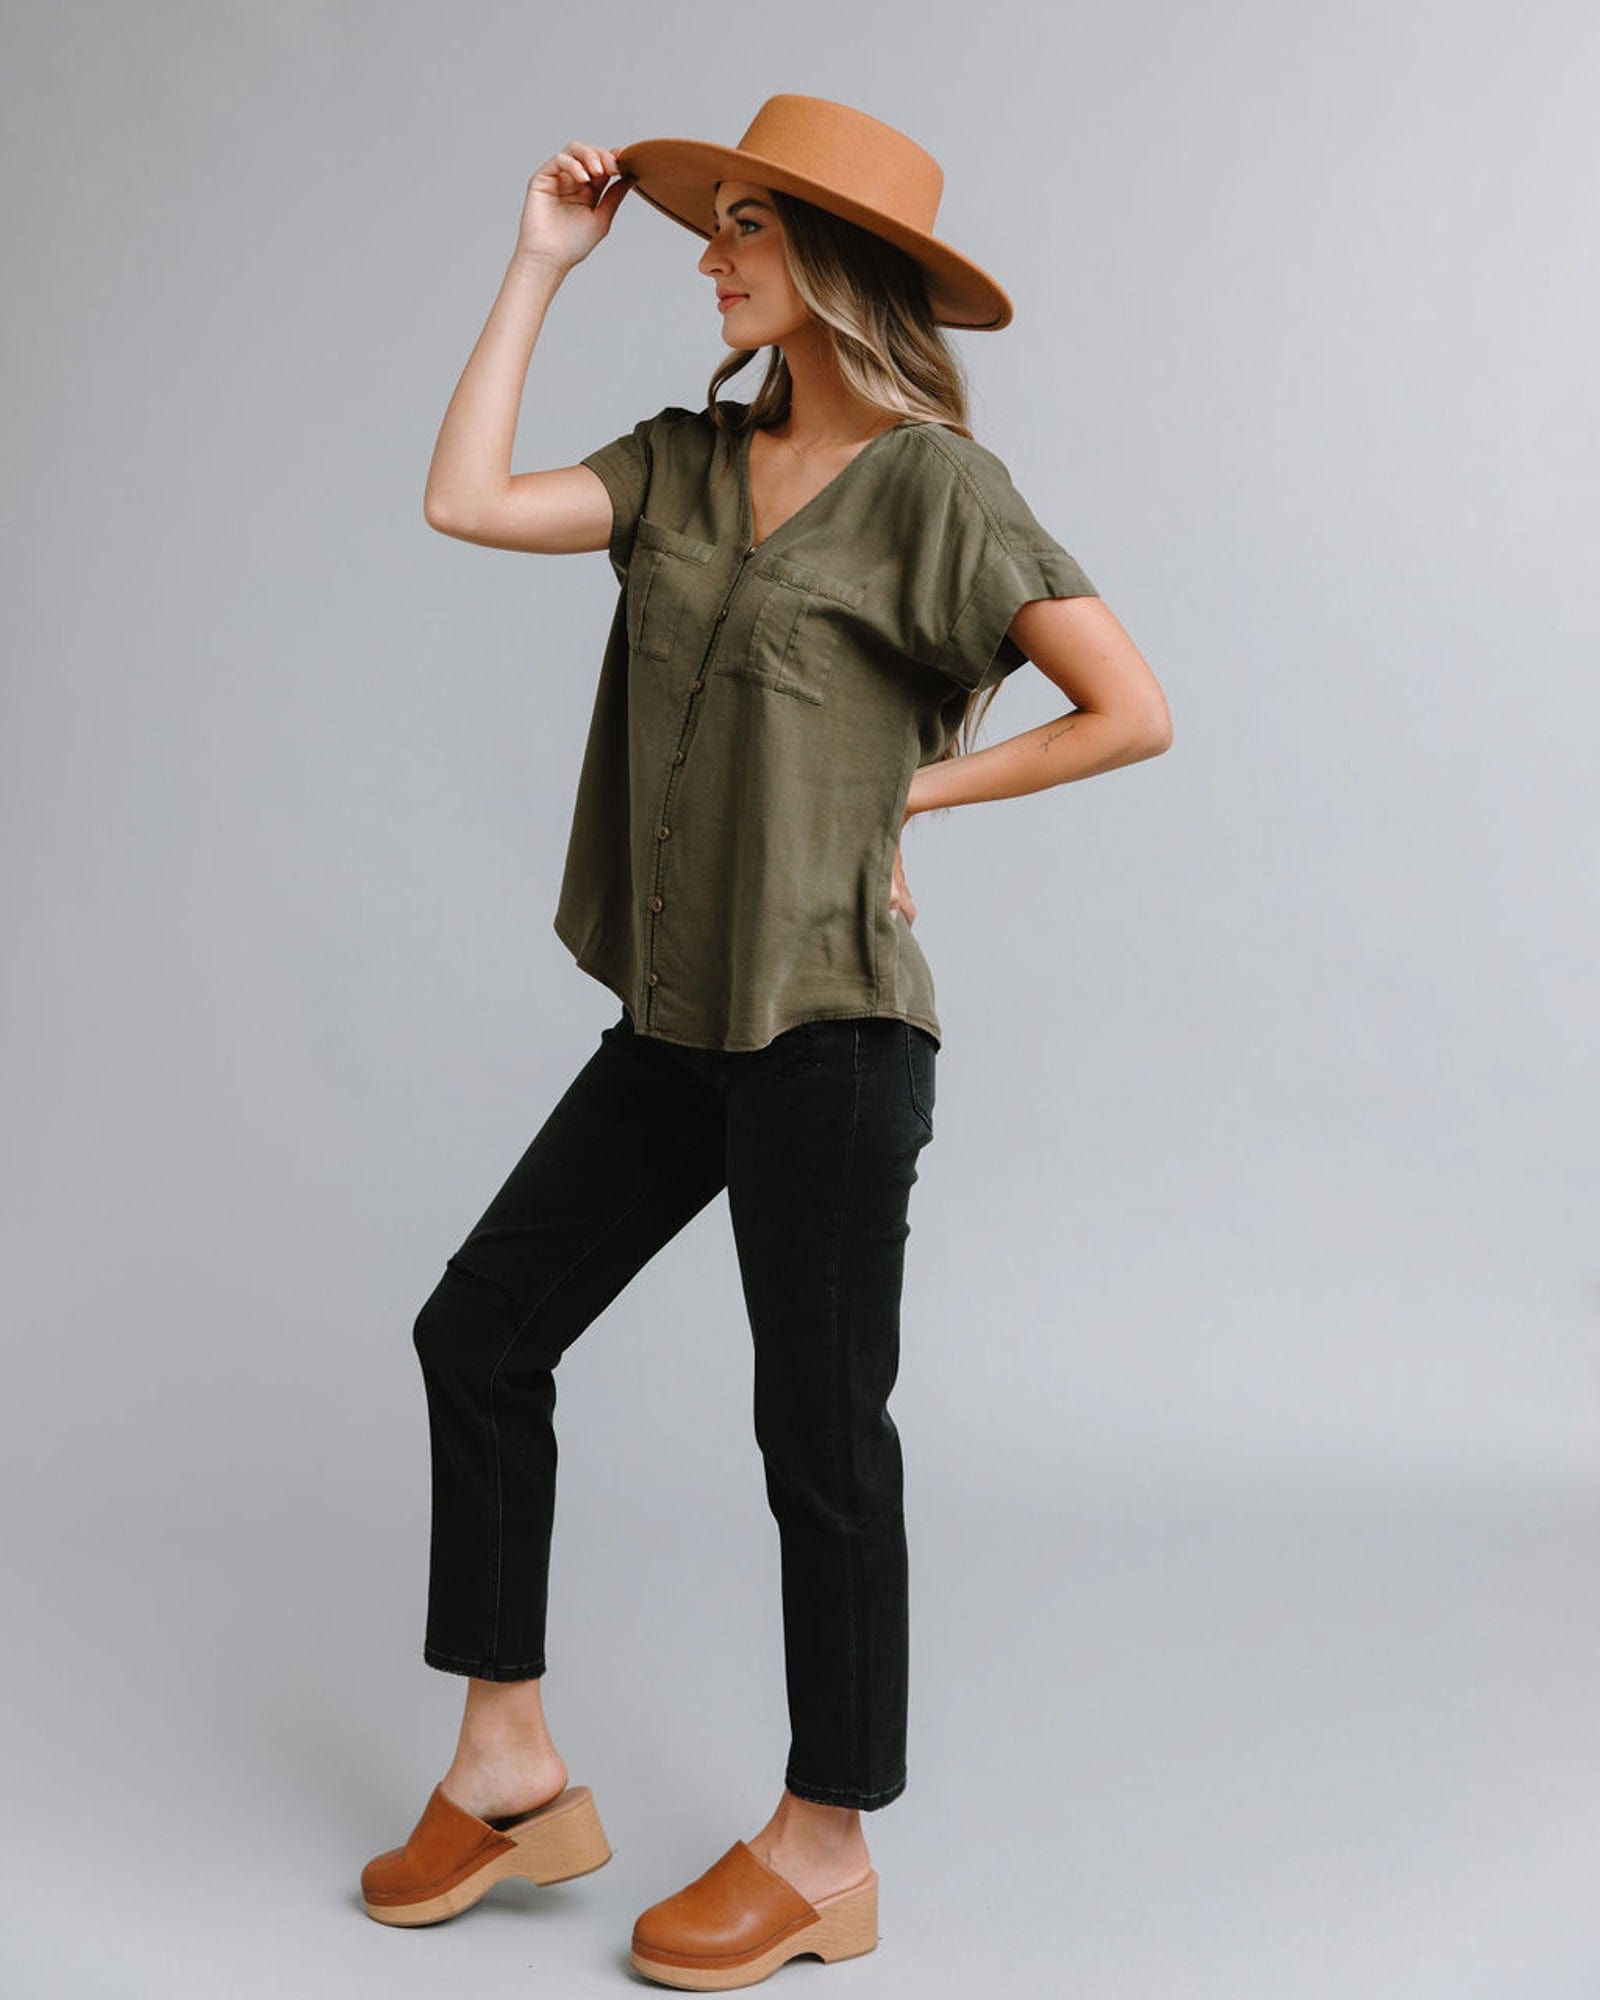 Woman in a short sleeve, v-neck blouse with front seam